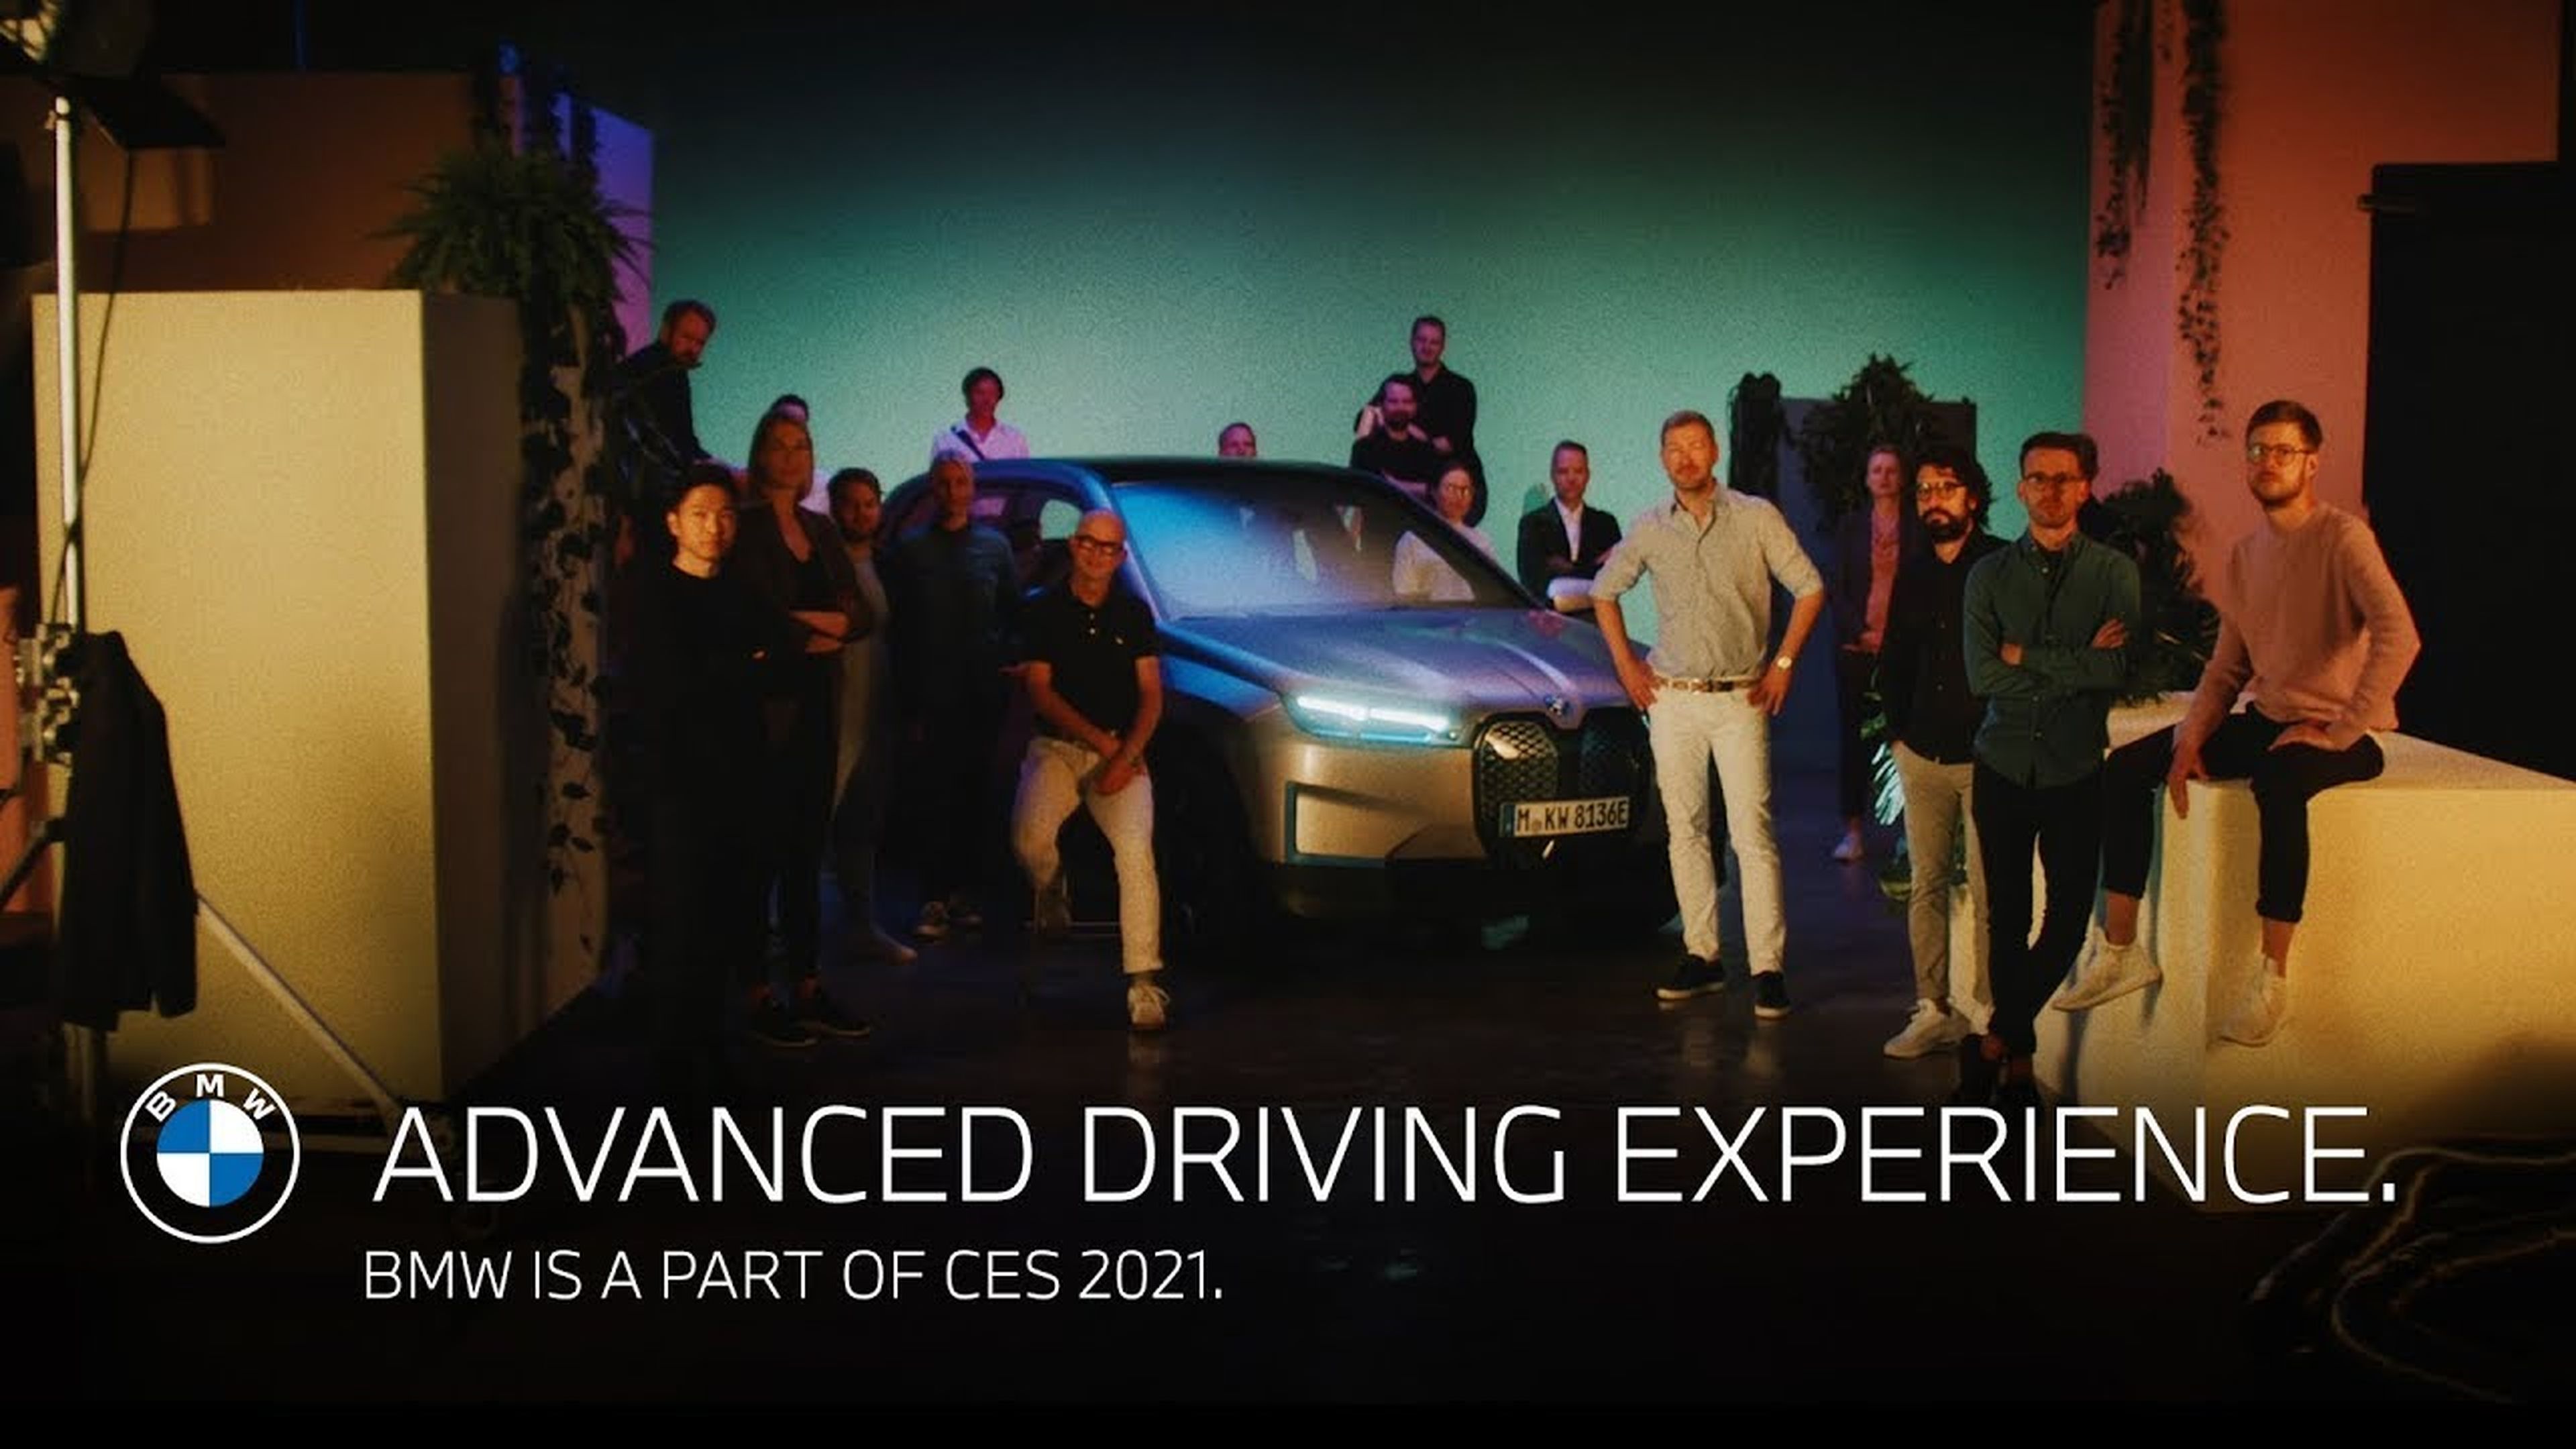 Advanced driving experience. BMW is a part of CES 2021.